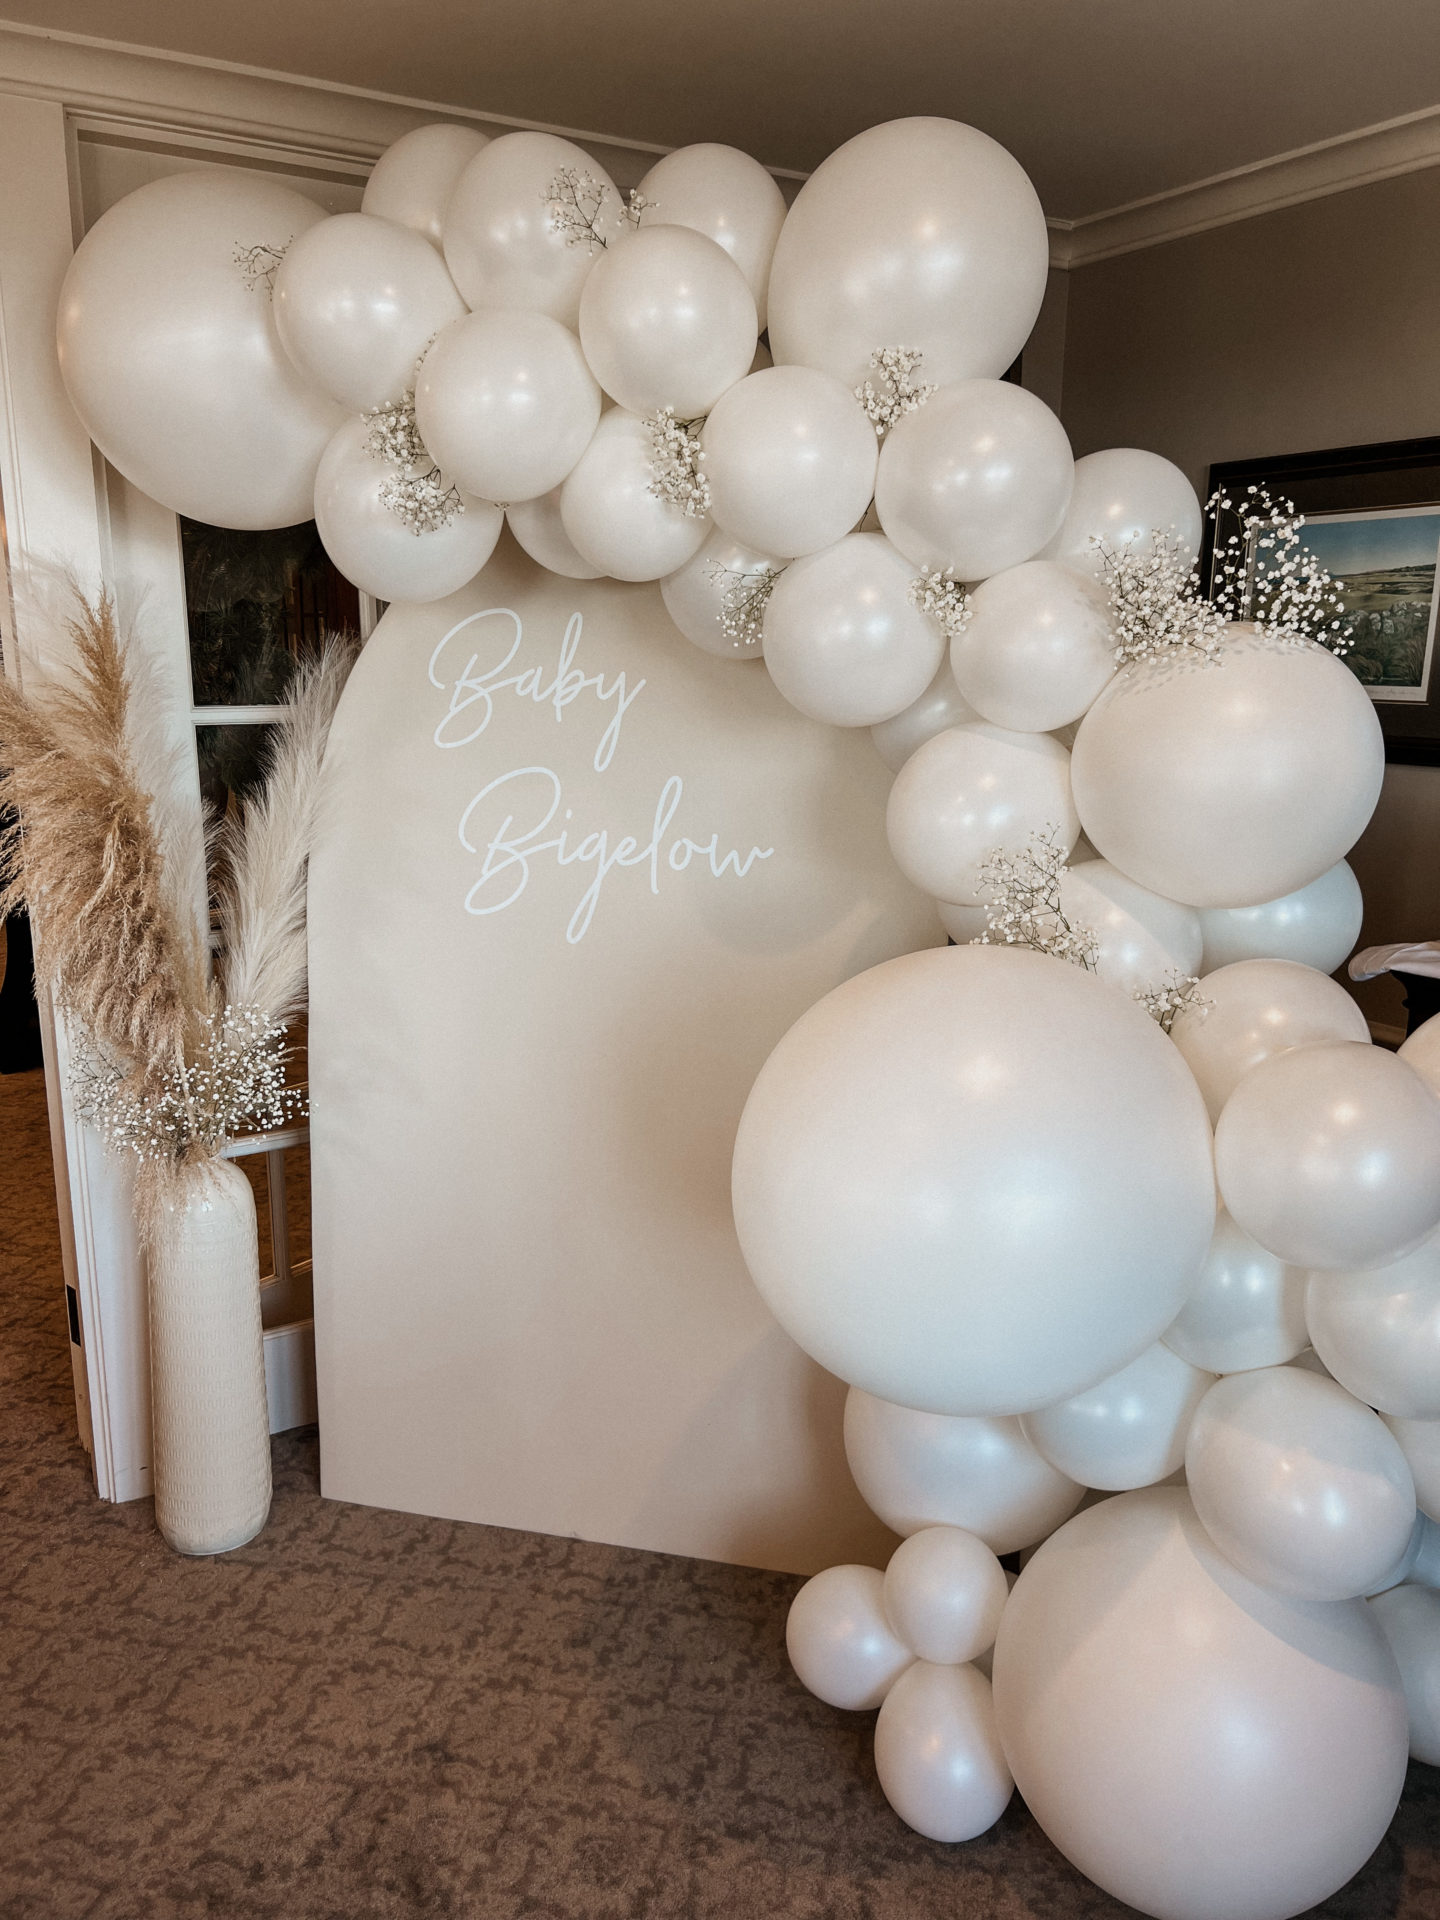 the grey edit, cortney bigelow, baby sprinkle, balloon arch sign, baby bigelow